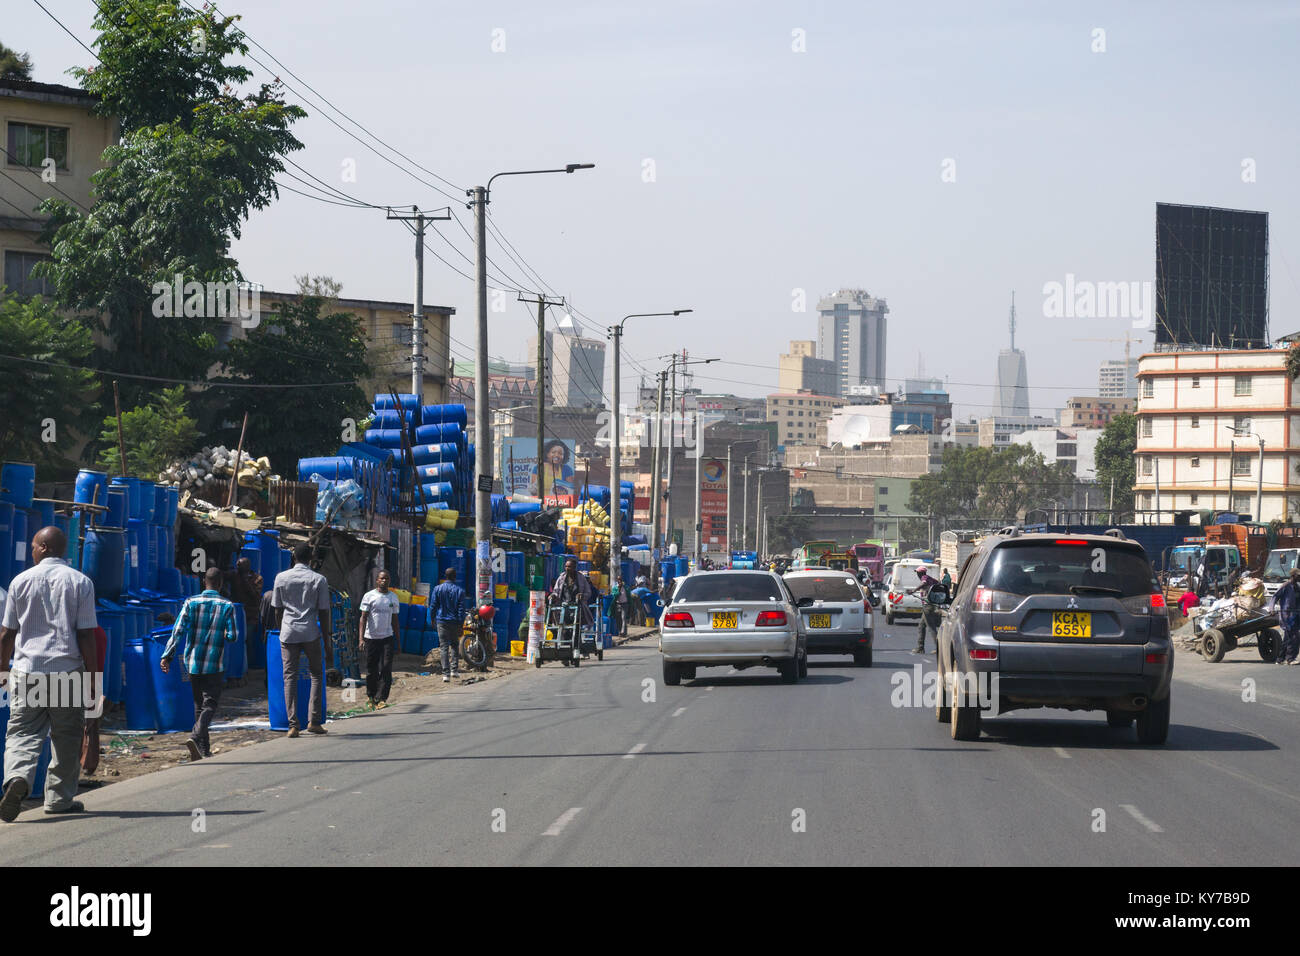 Vehicles driving down Ring Road Ngara with stalls and shops on the roadside and people walking, Nairobi, Kenya, East Africa Stock Photo